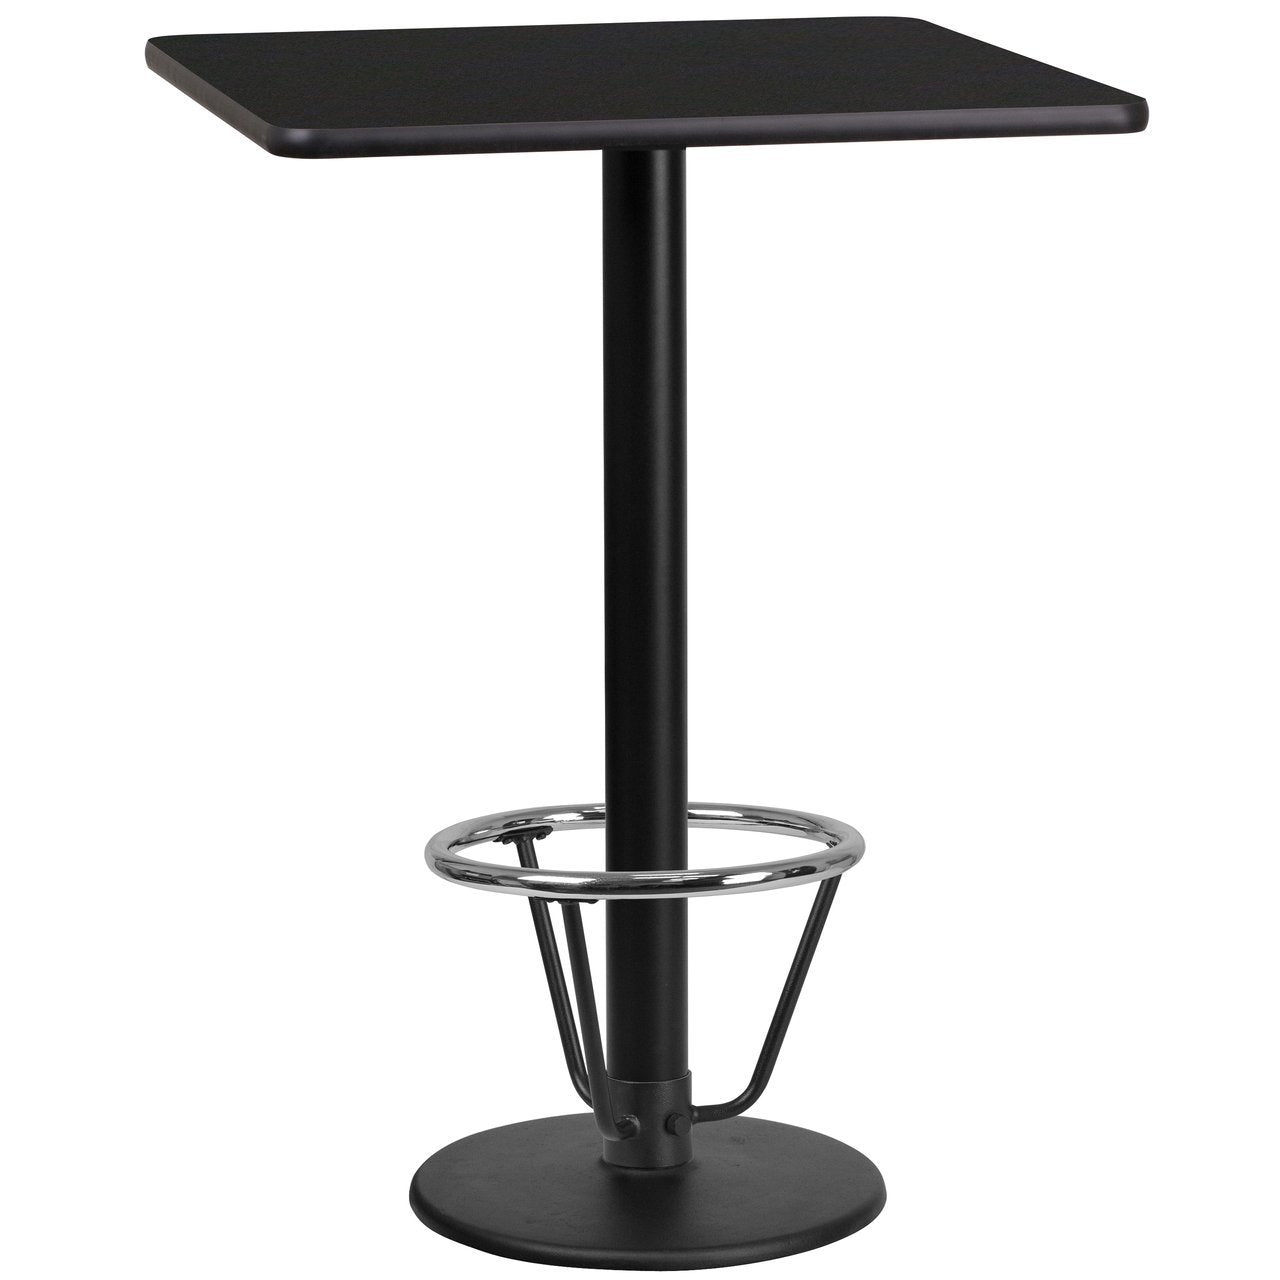 TABLE AND BASE - BAR HEIGHT